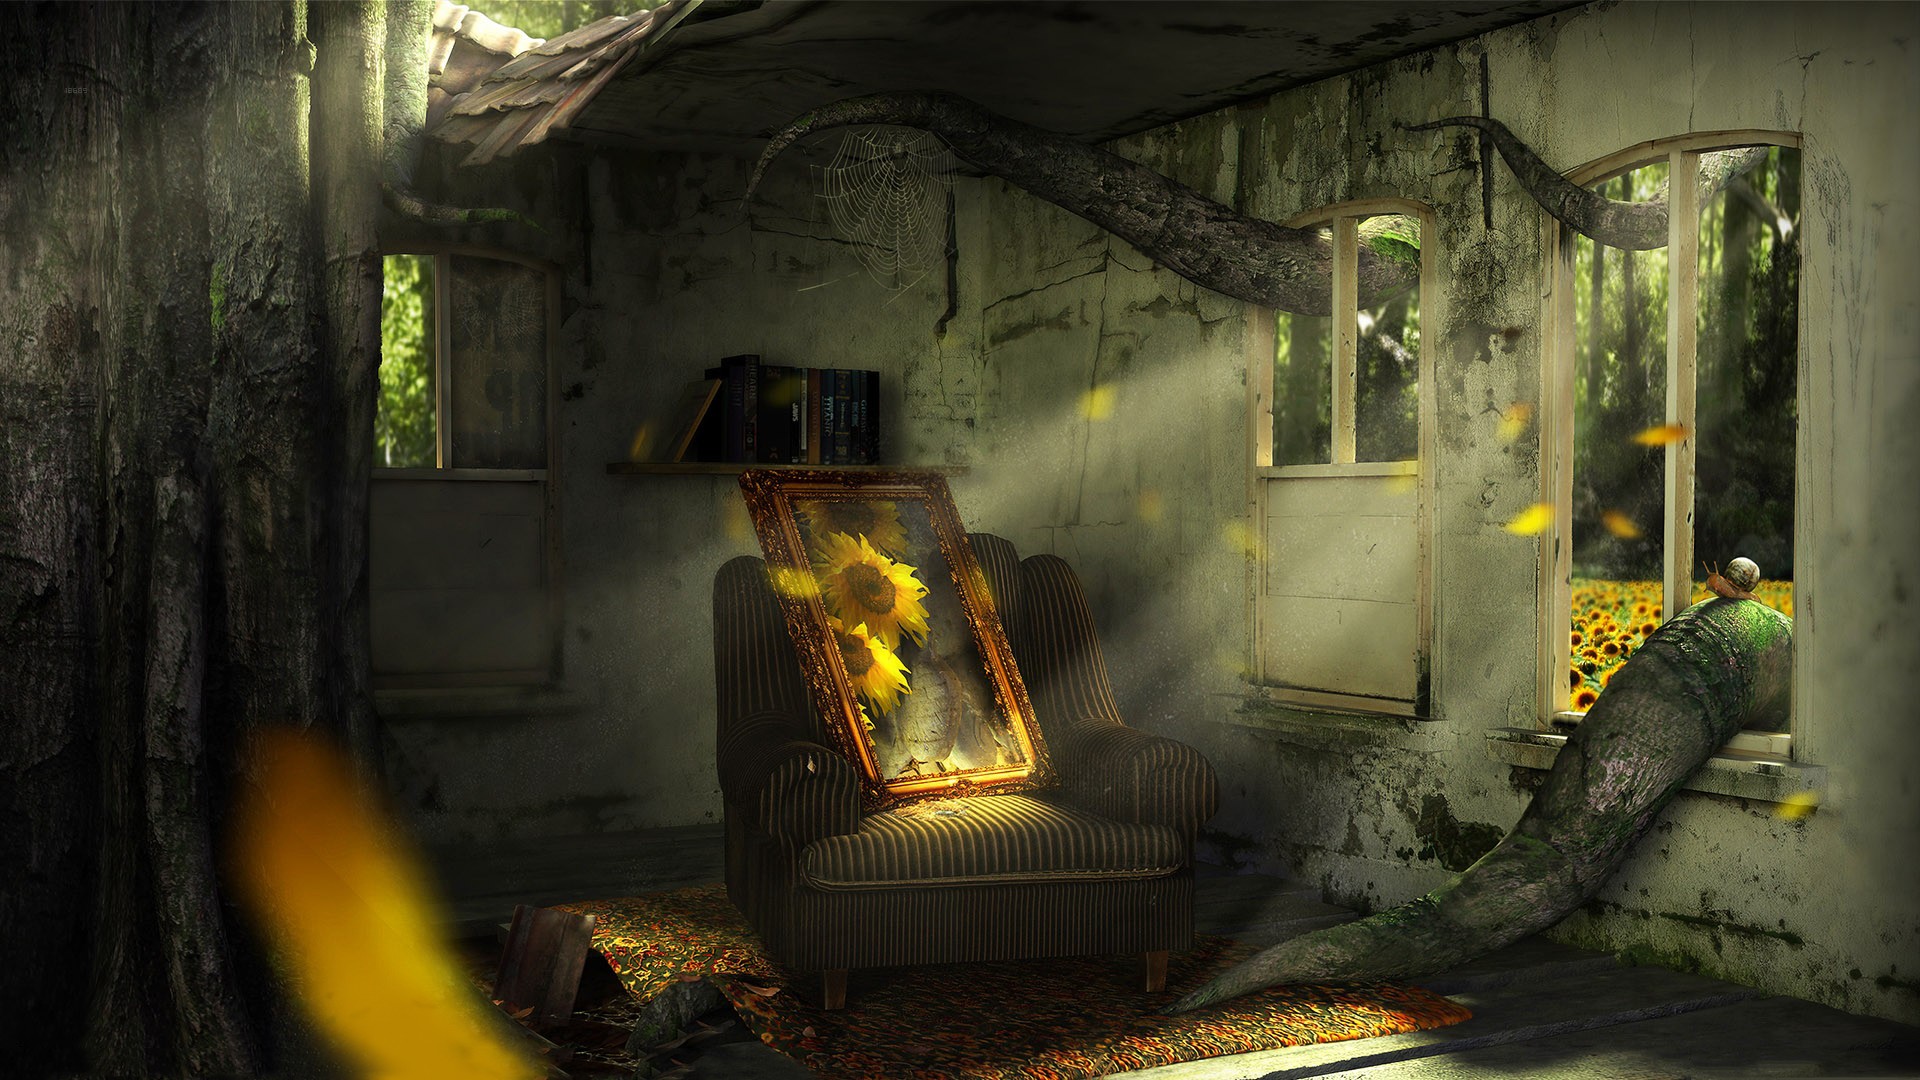 General 1920x1080 digital art painting nature spiderwebs ruins chair sunflowers abandoned